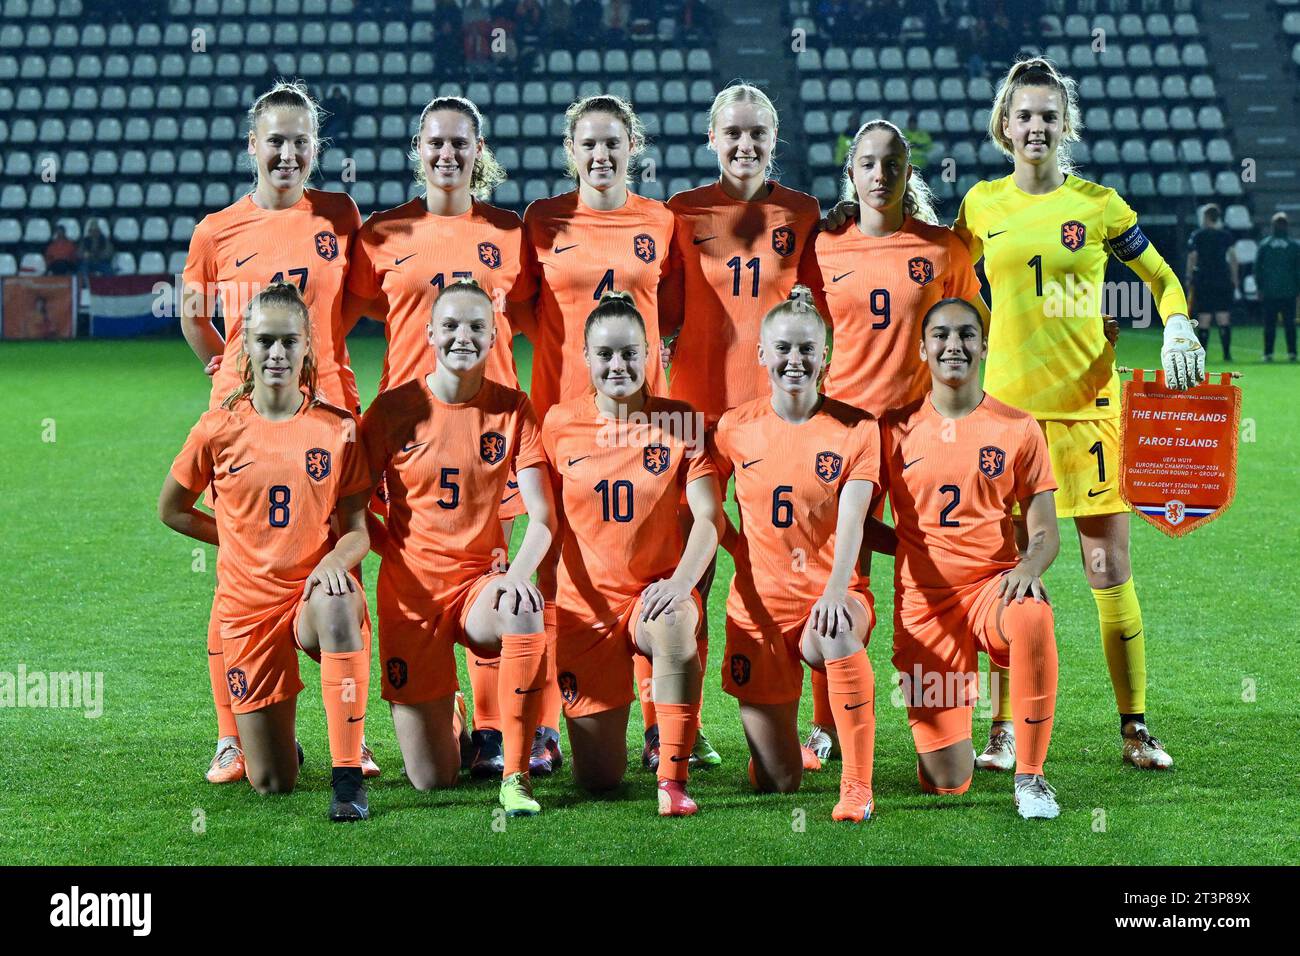 players of The Netherlands with Fieke Kroese (17) of the Netherlands, =Maud Rutgers (13) of the Netherlands, Veerle Buurman (4) of the Netherlands, Bo van Egmond (11) of the Netherlands, Danique Tolhoek (9) of the Netherlands, goalkeeper Femke Liefting (1) of the Netherlands, Ilse Kemper (8) of the Netherlands, Emma Frijns (5) of the Netherlands, Senne van de Velde (10) of the Netherlands, Kealyn Thomas (6) of the Netherlands and Daliyah de Klonia (2) of the Netherlands pose for a team photo during a female soccer game between the national women under 19 teams of The Netherlands and Faroe Isla Stock Photo